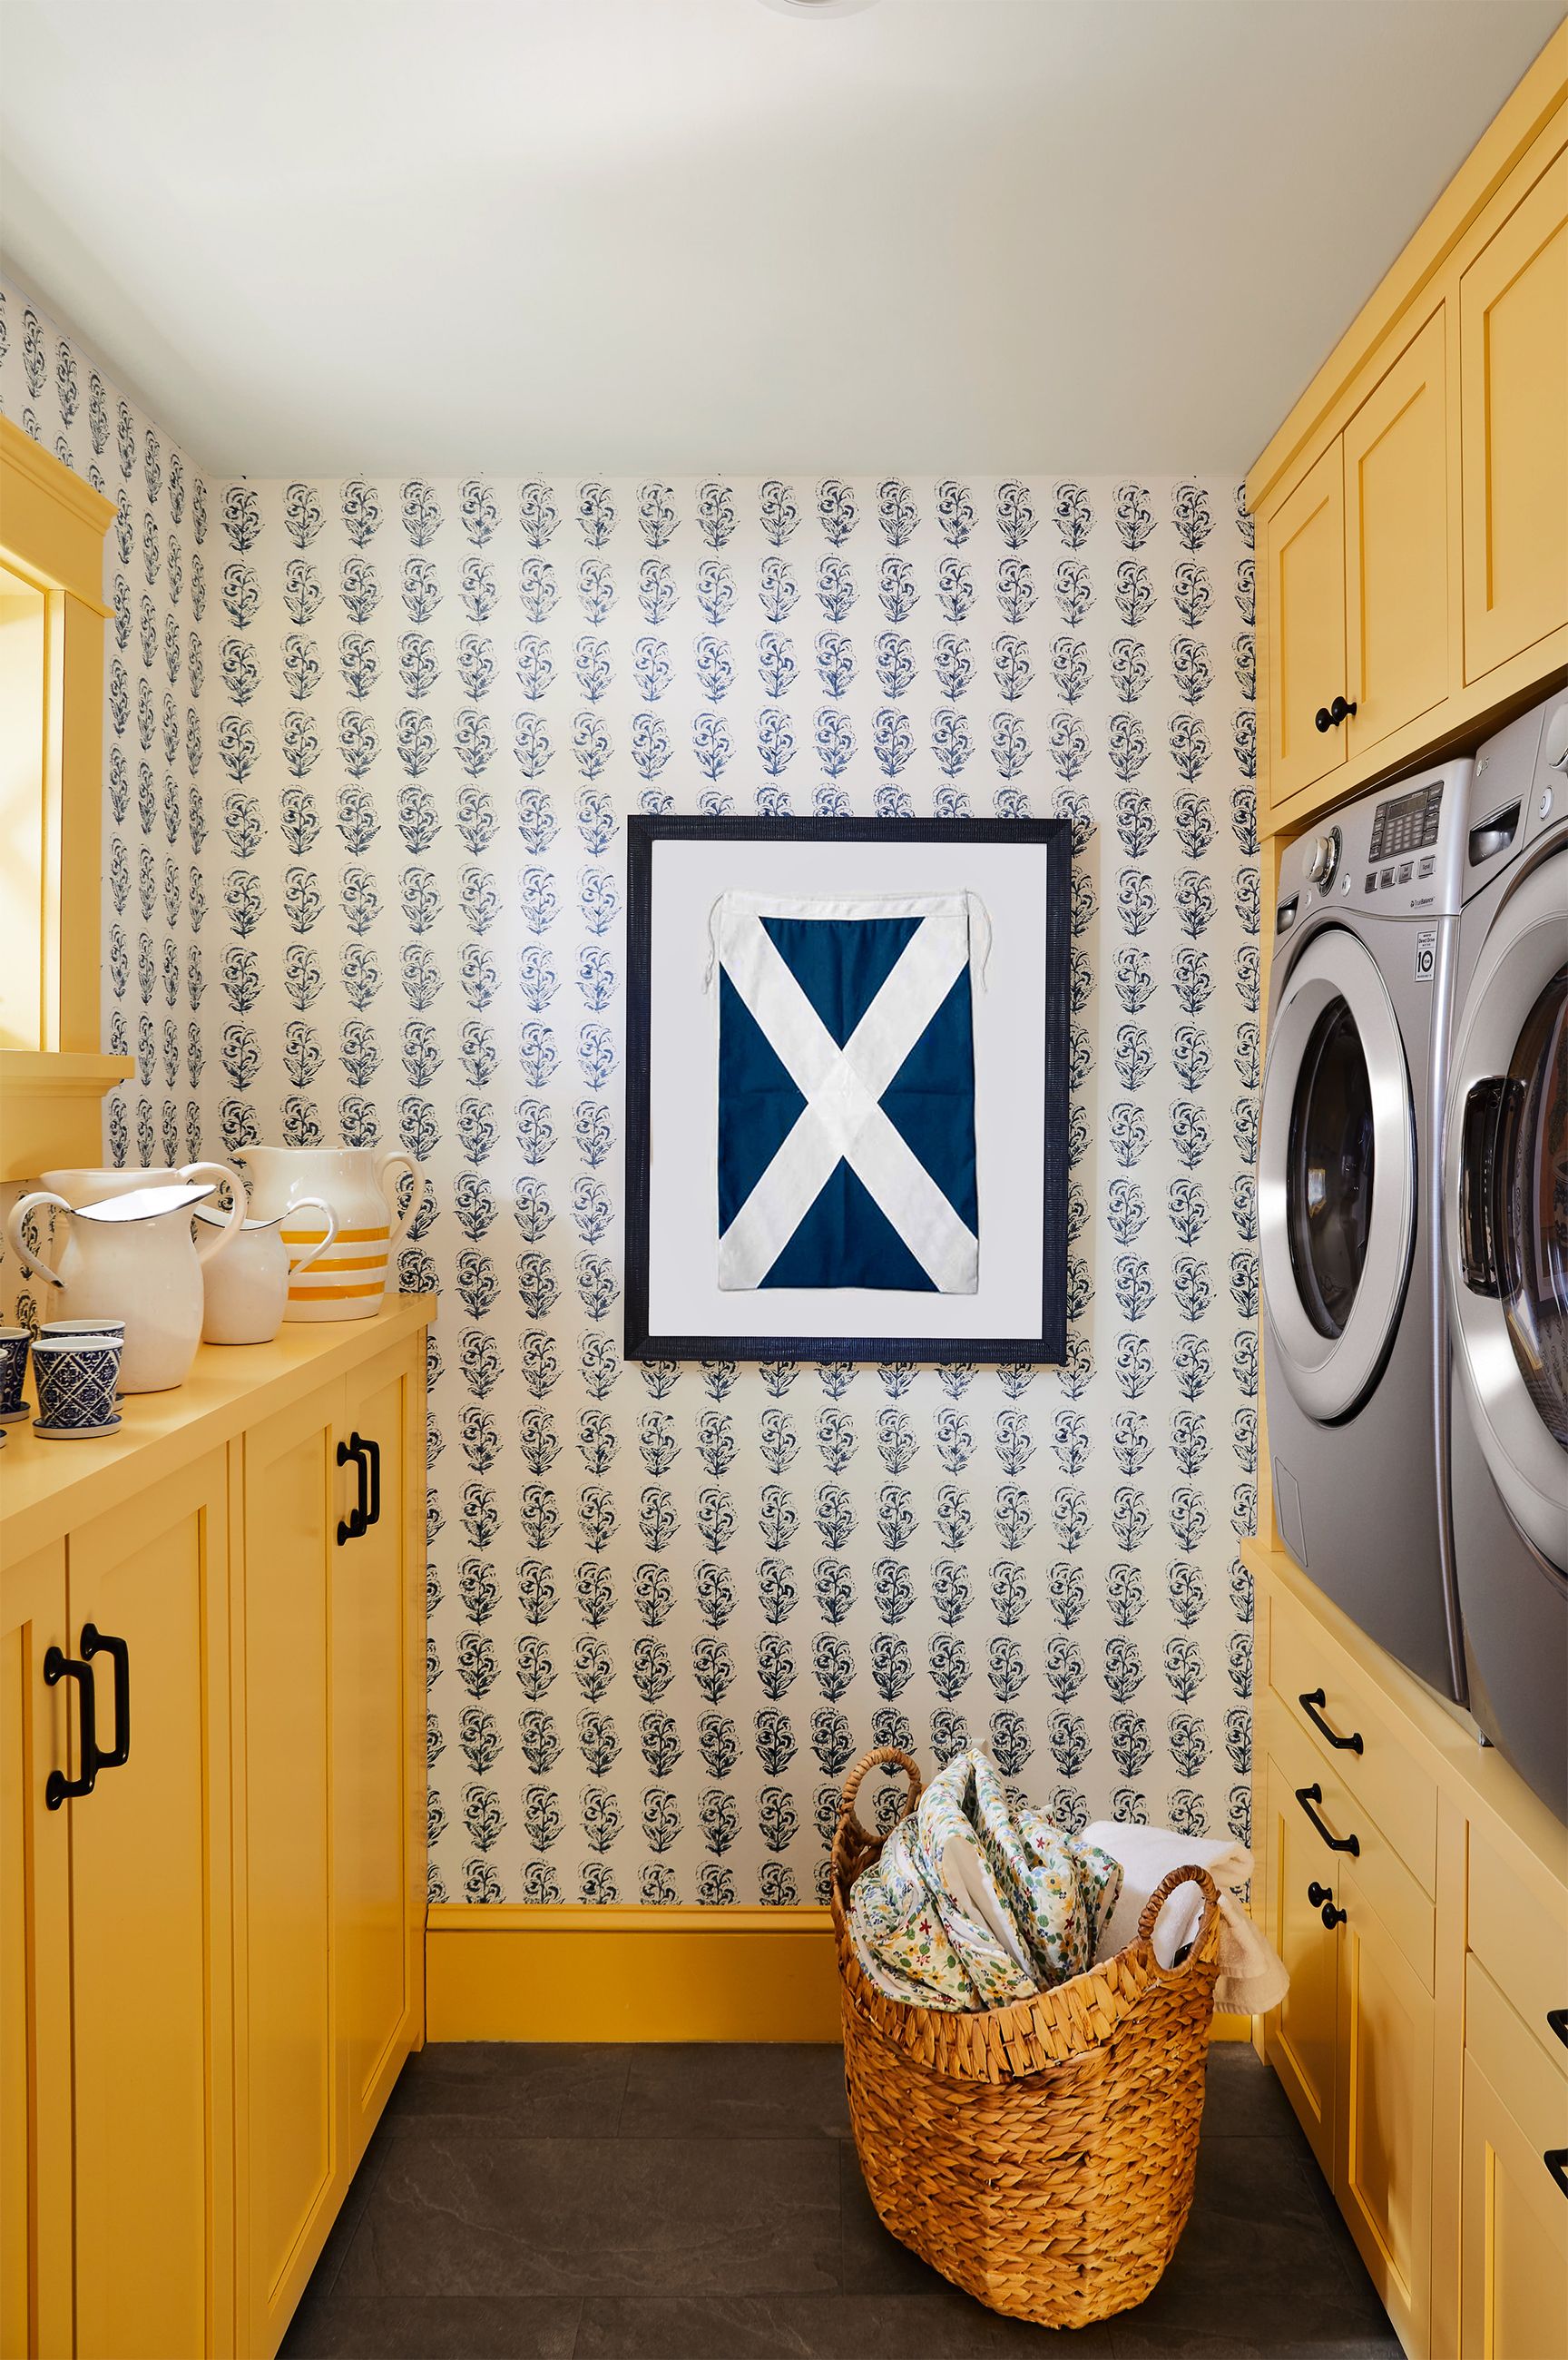 White and Blue Laundry Room with Wallpaper as Backsplash  Transitional   Laundry Room